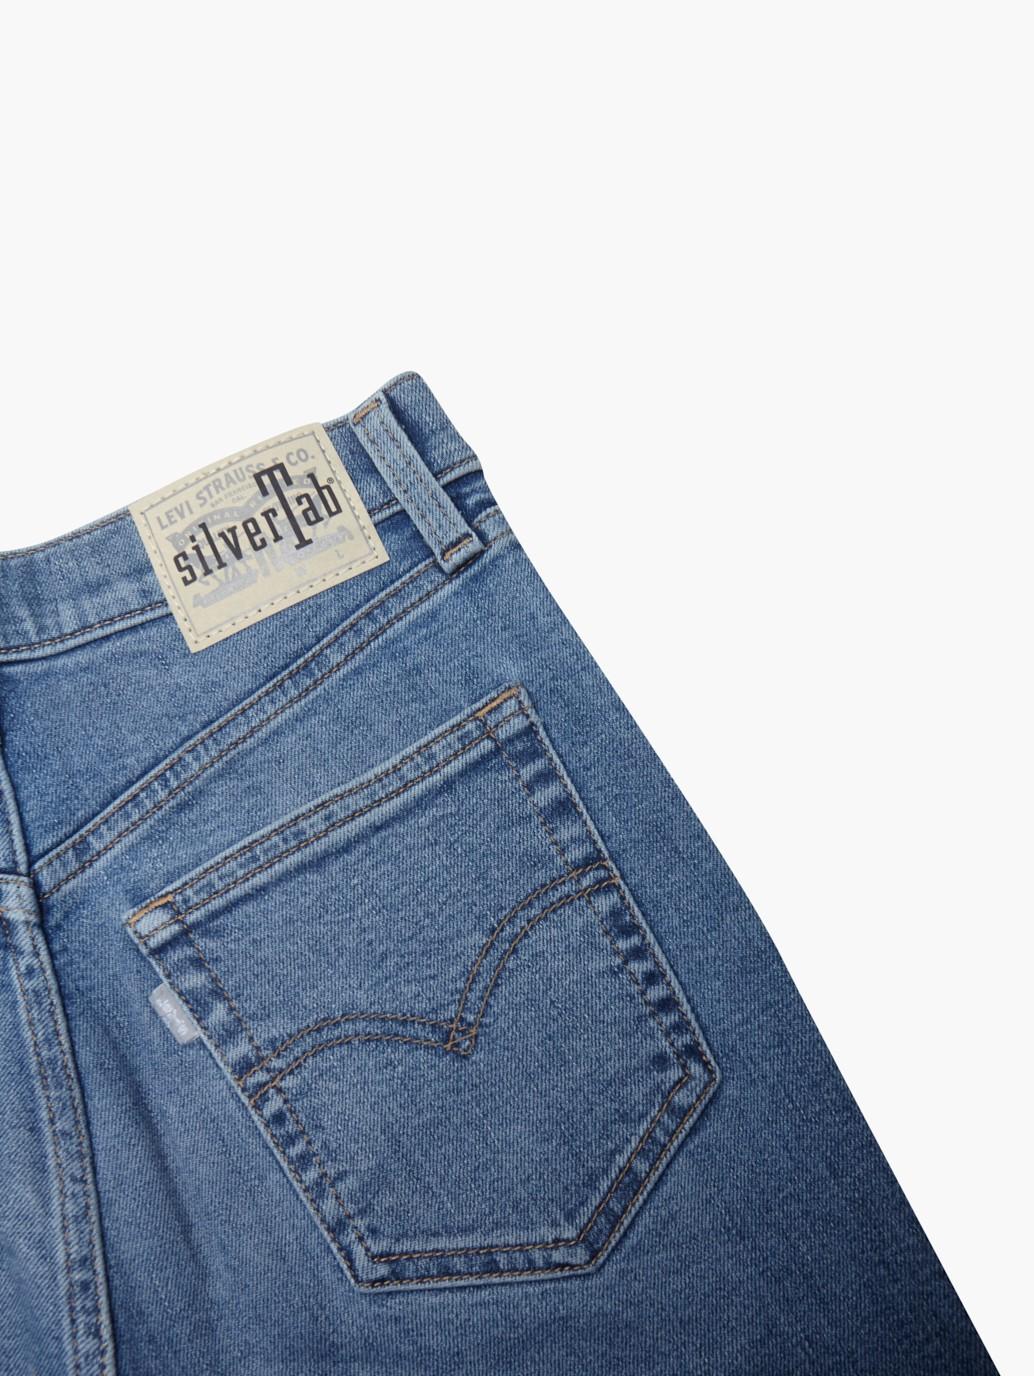 Buy Levi's® Women's SilverTab™ High Waisted Mom Jeans | Levi’s ...